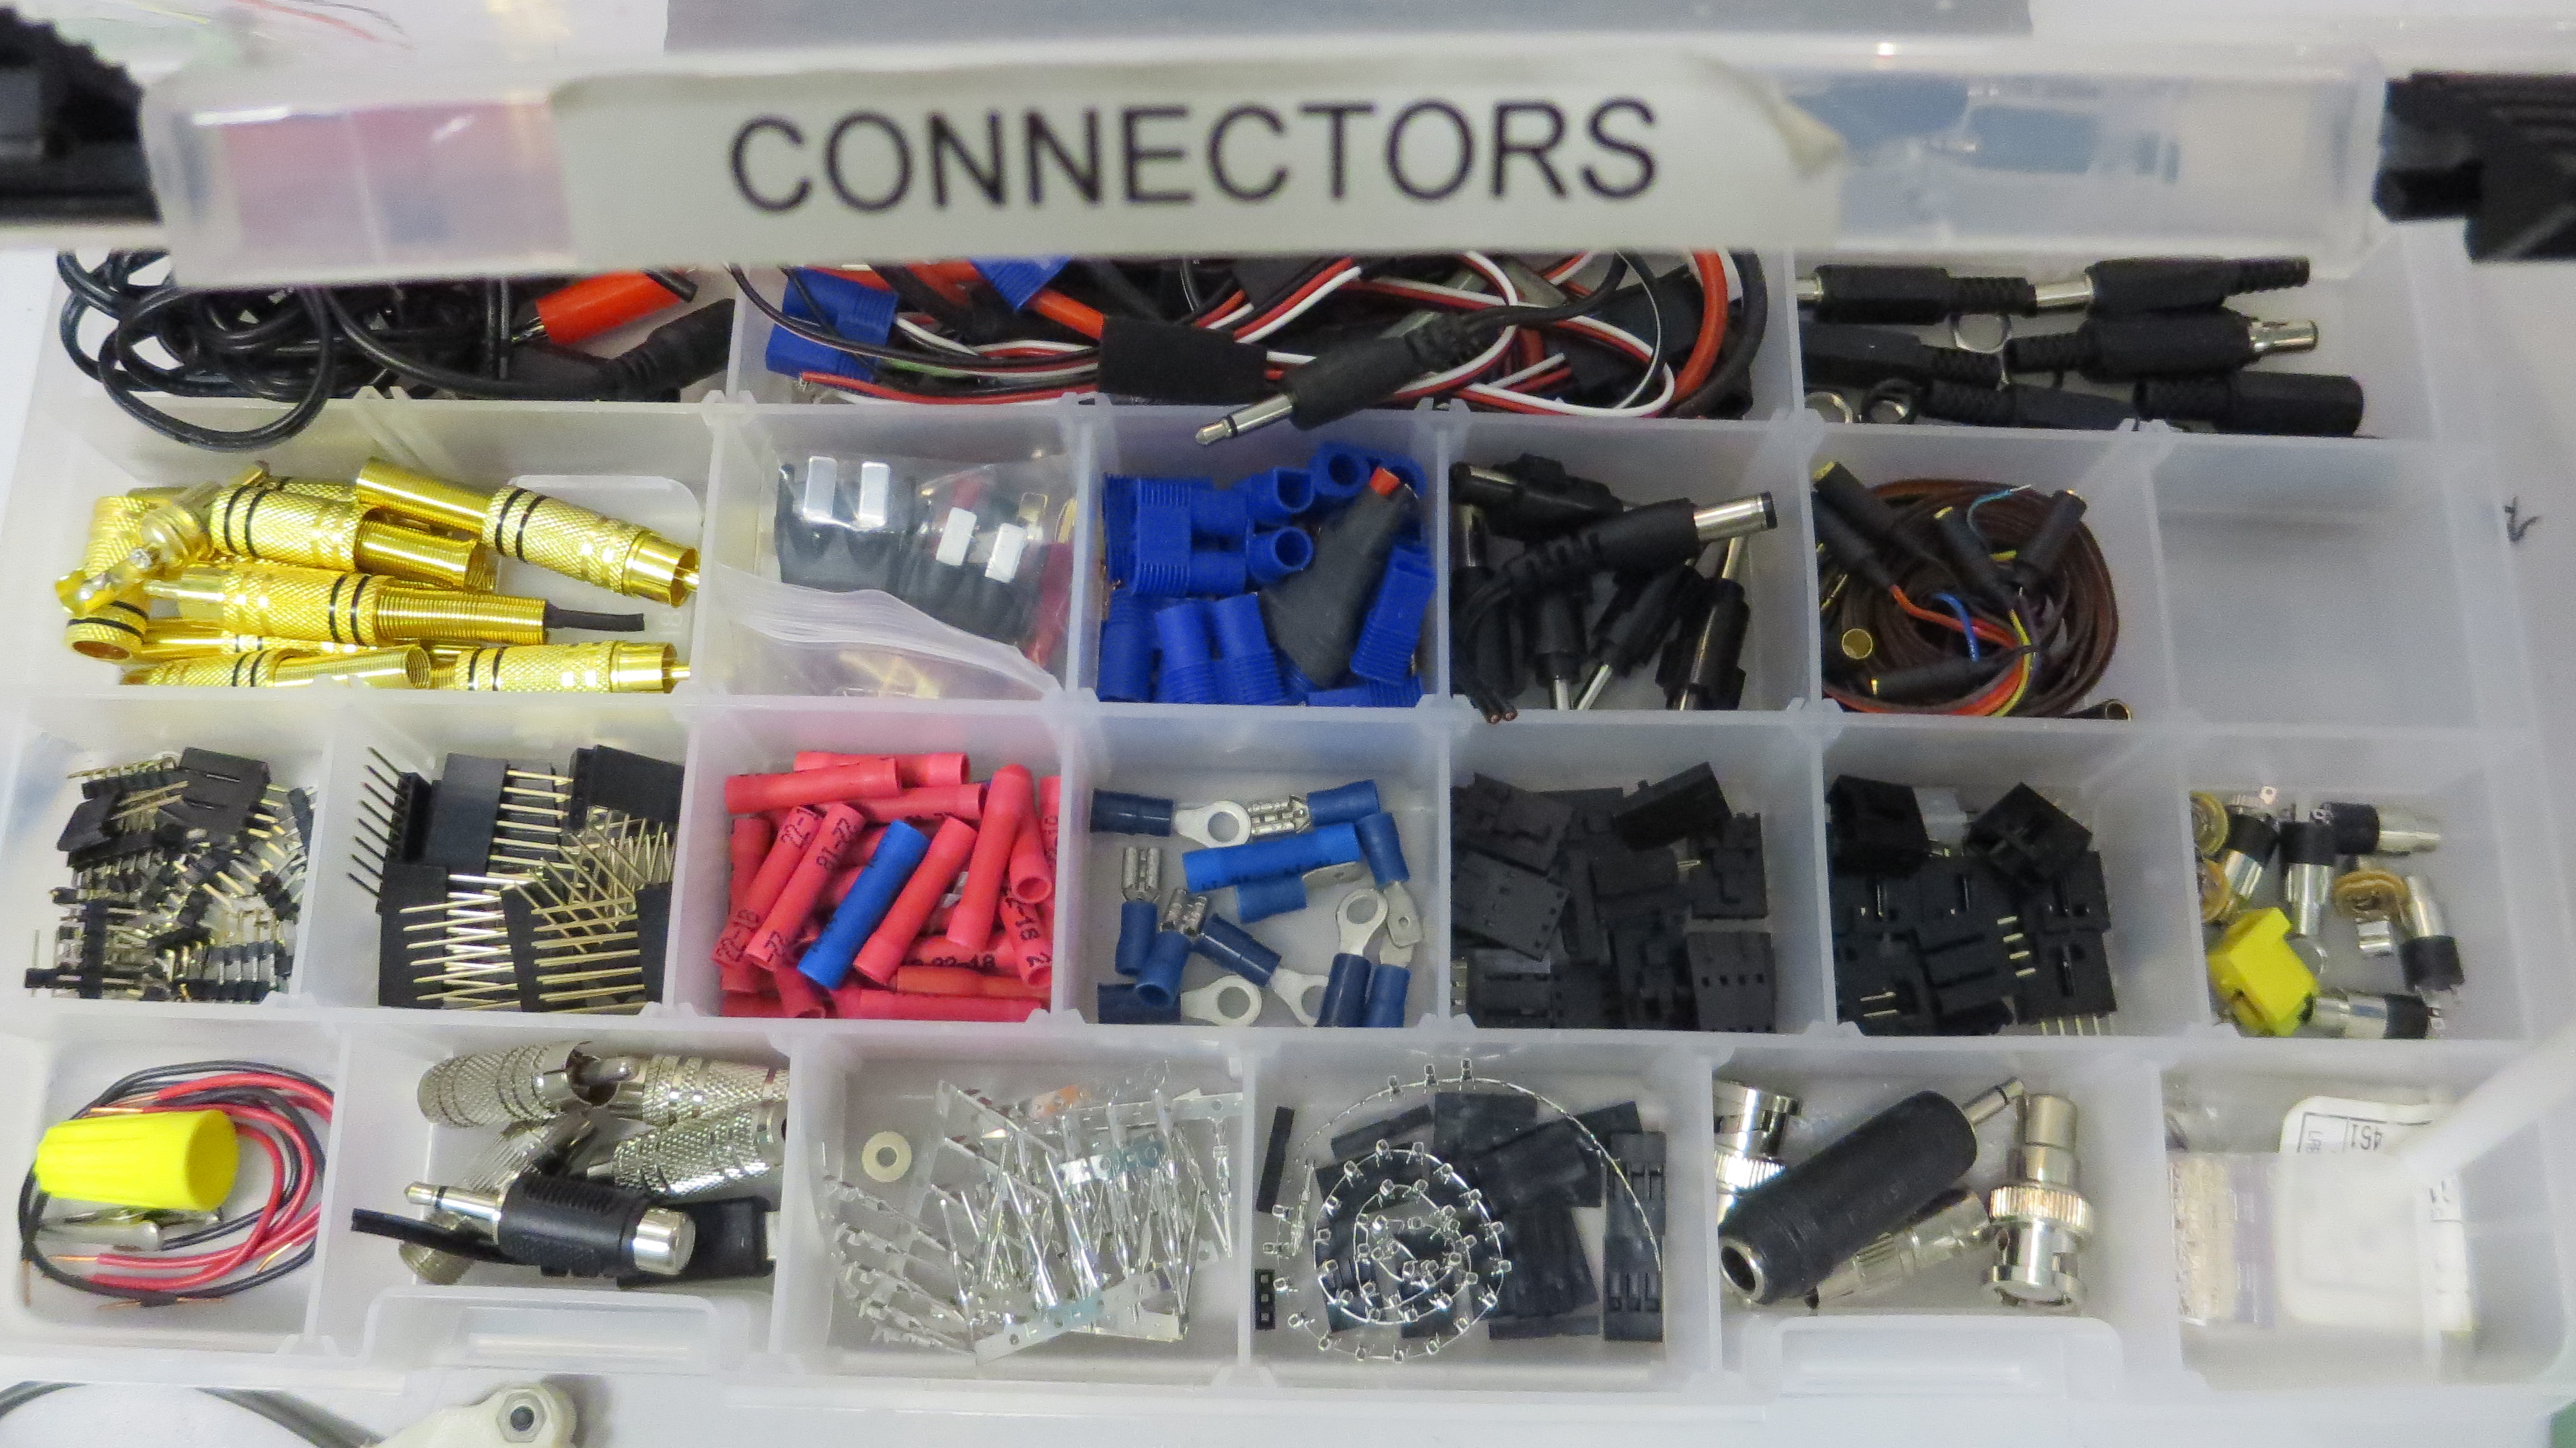 A box of various connectors 3D printed by Spark!Lab's Tim Pula